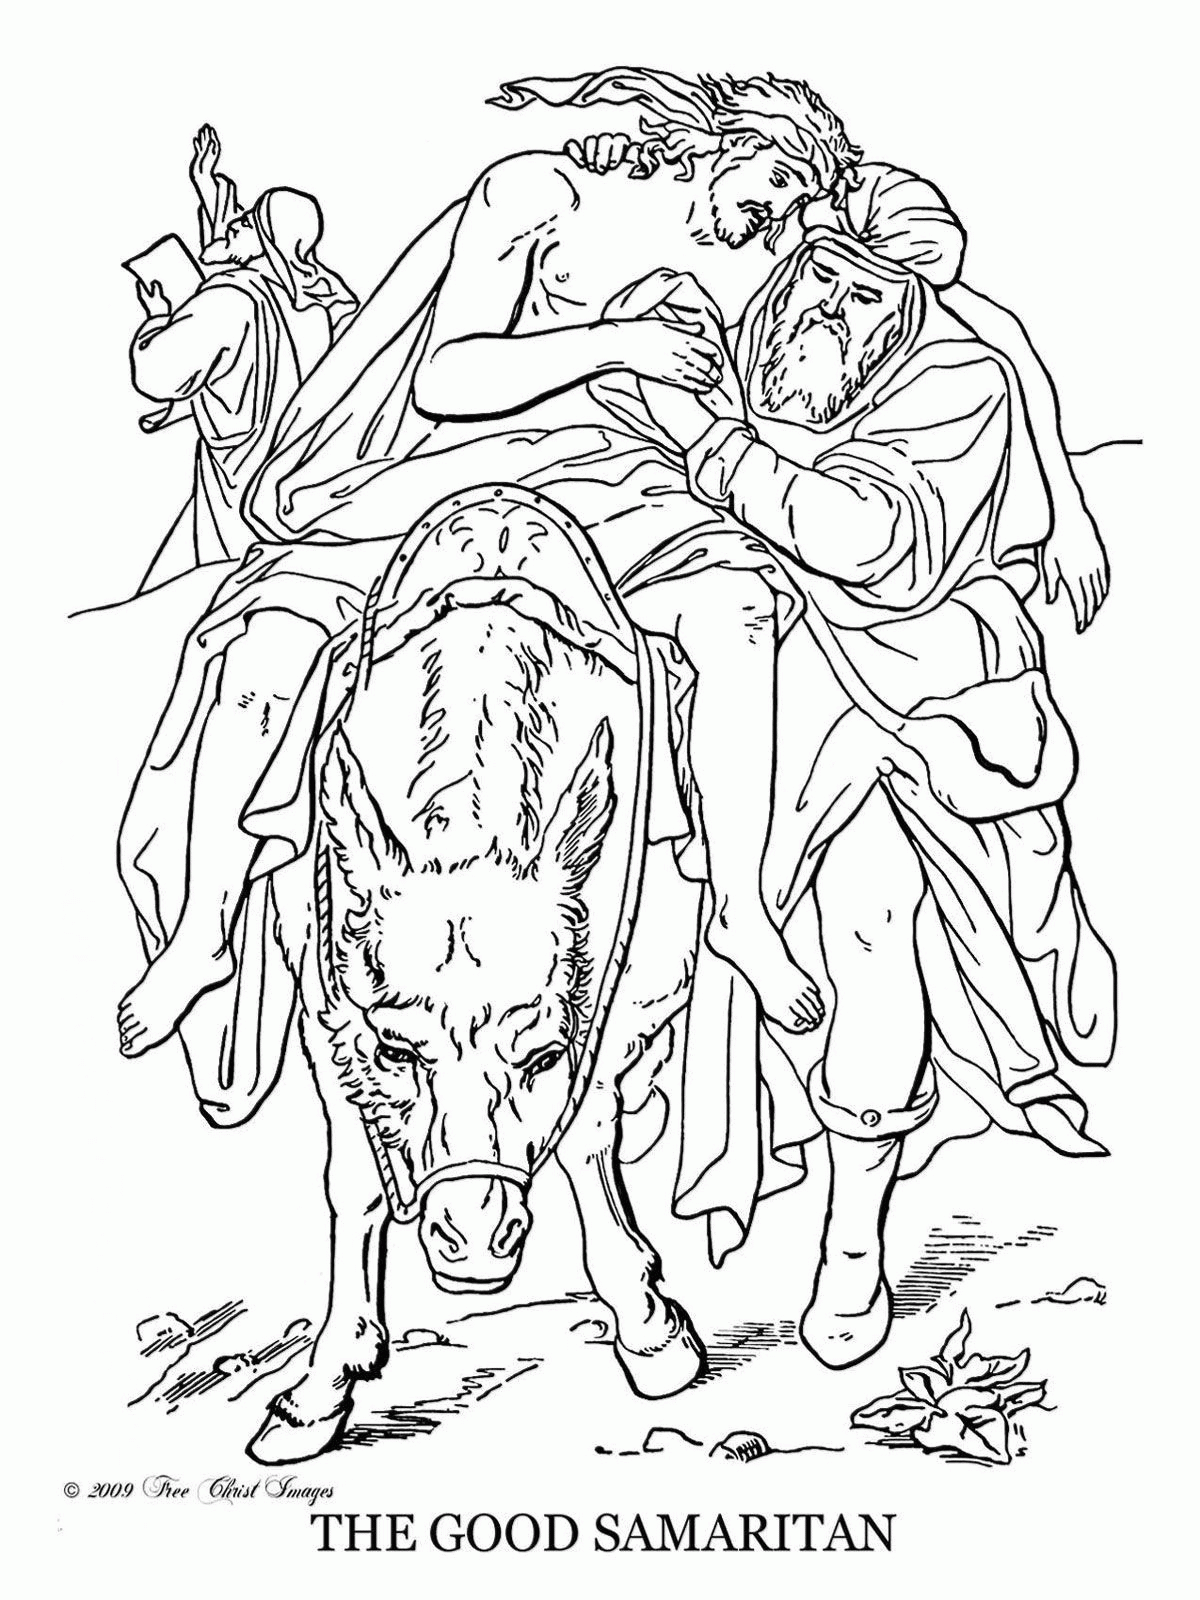 Download Coloring Pages Of The Good Samaritan - Coloring Home